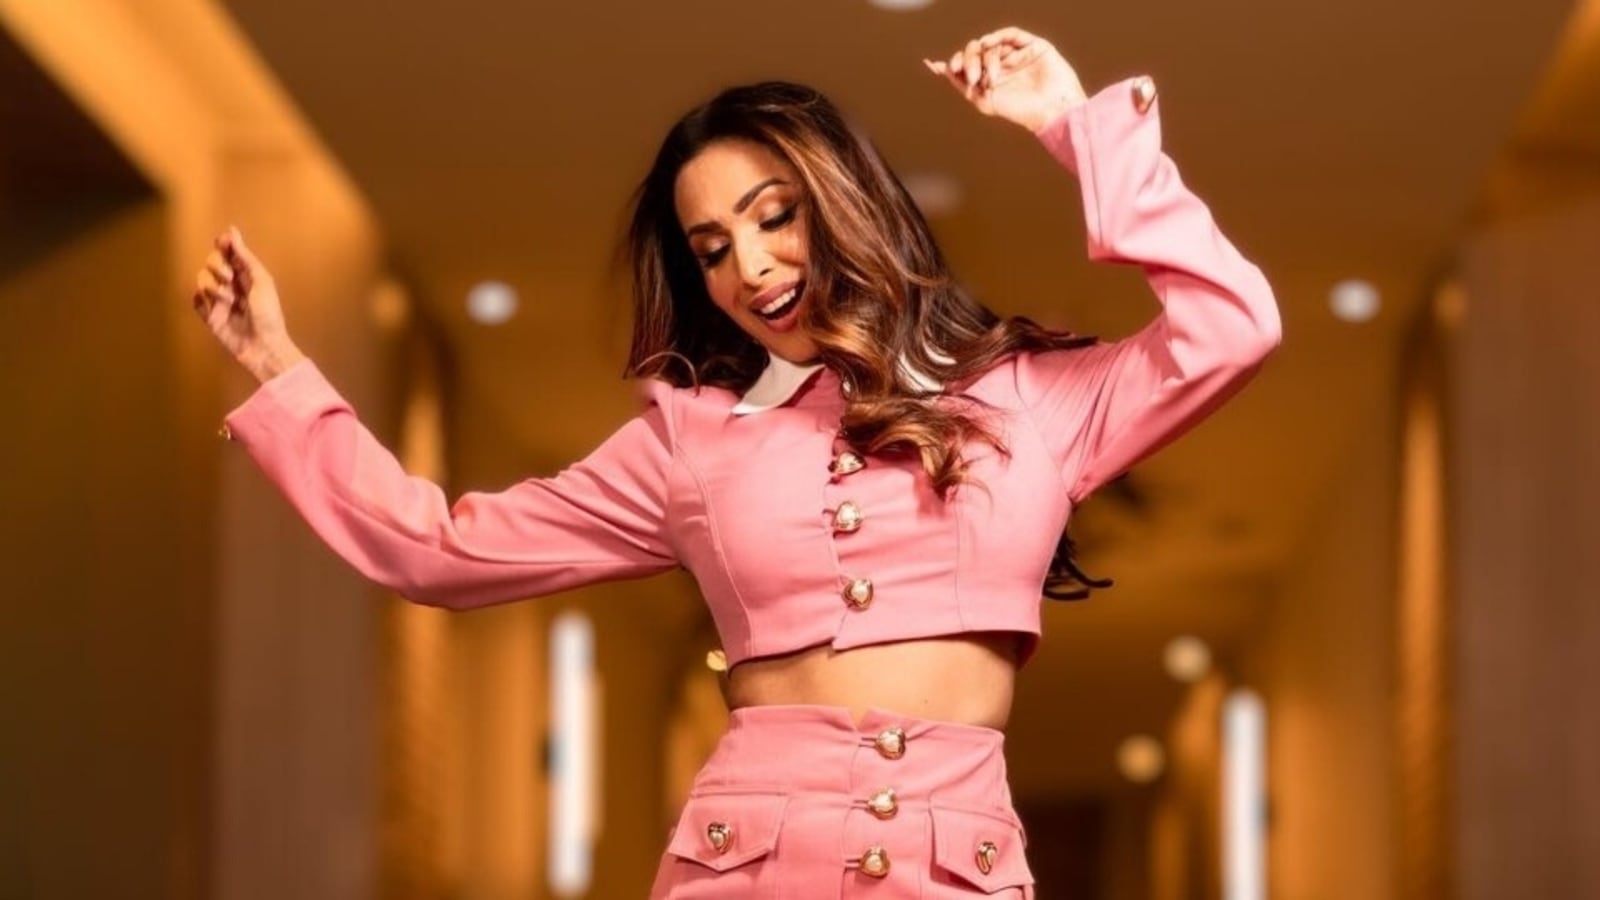 Malaika Arora serves the ultimate night-out look in pink crop top and mini skirt for new sizzling pics: See inside